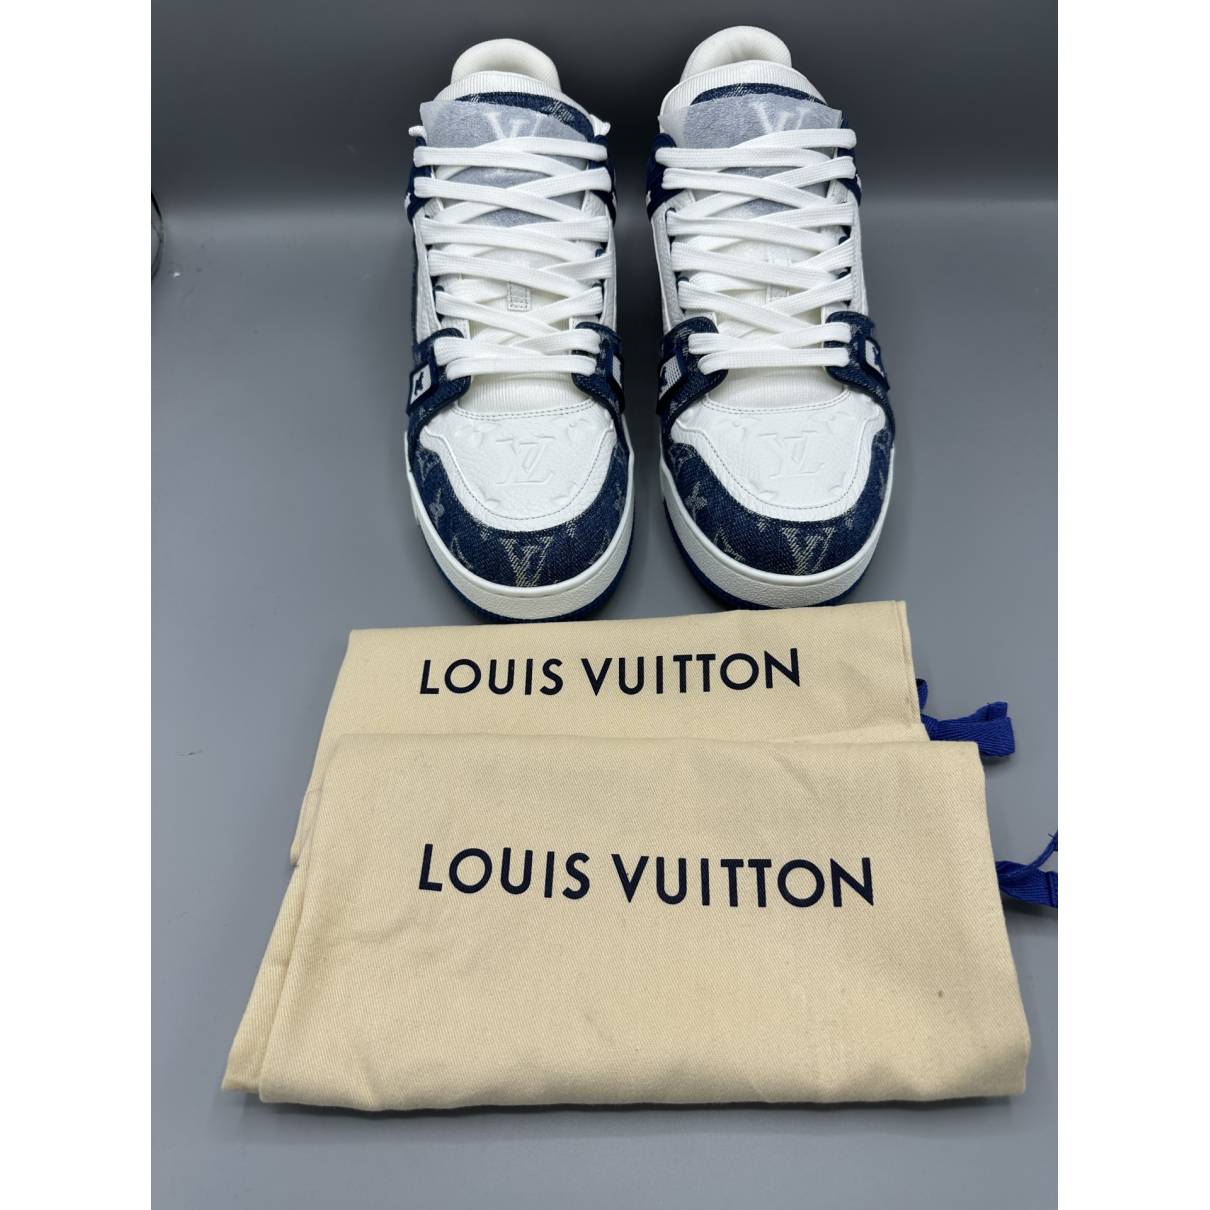 Lv trainer leather low trainers Louis Vuitton Blue size 43.5 EU in Leather  - 32955511